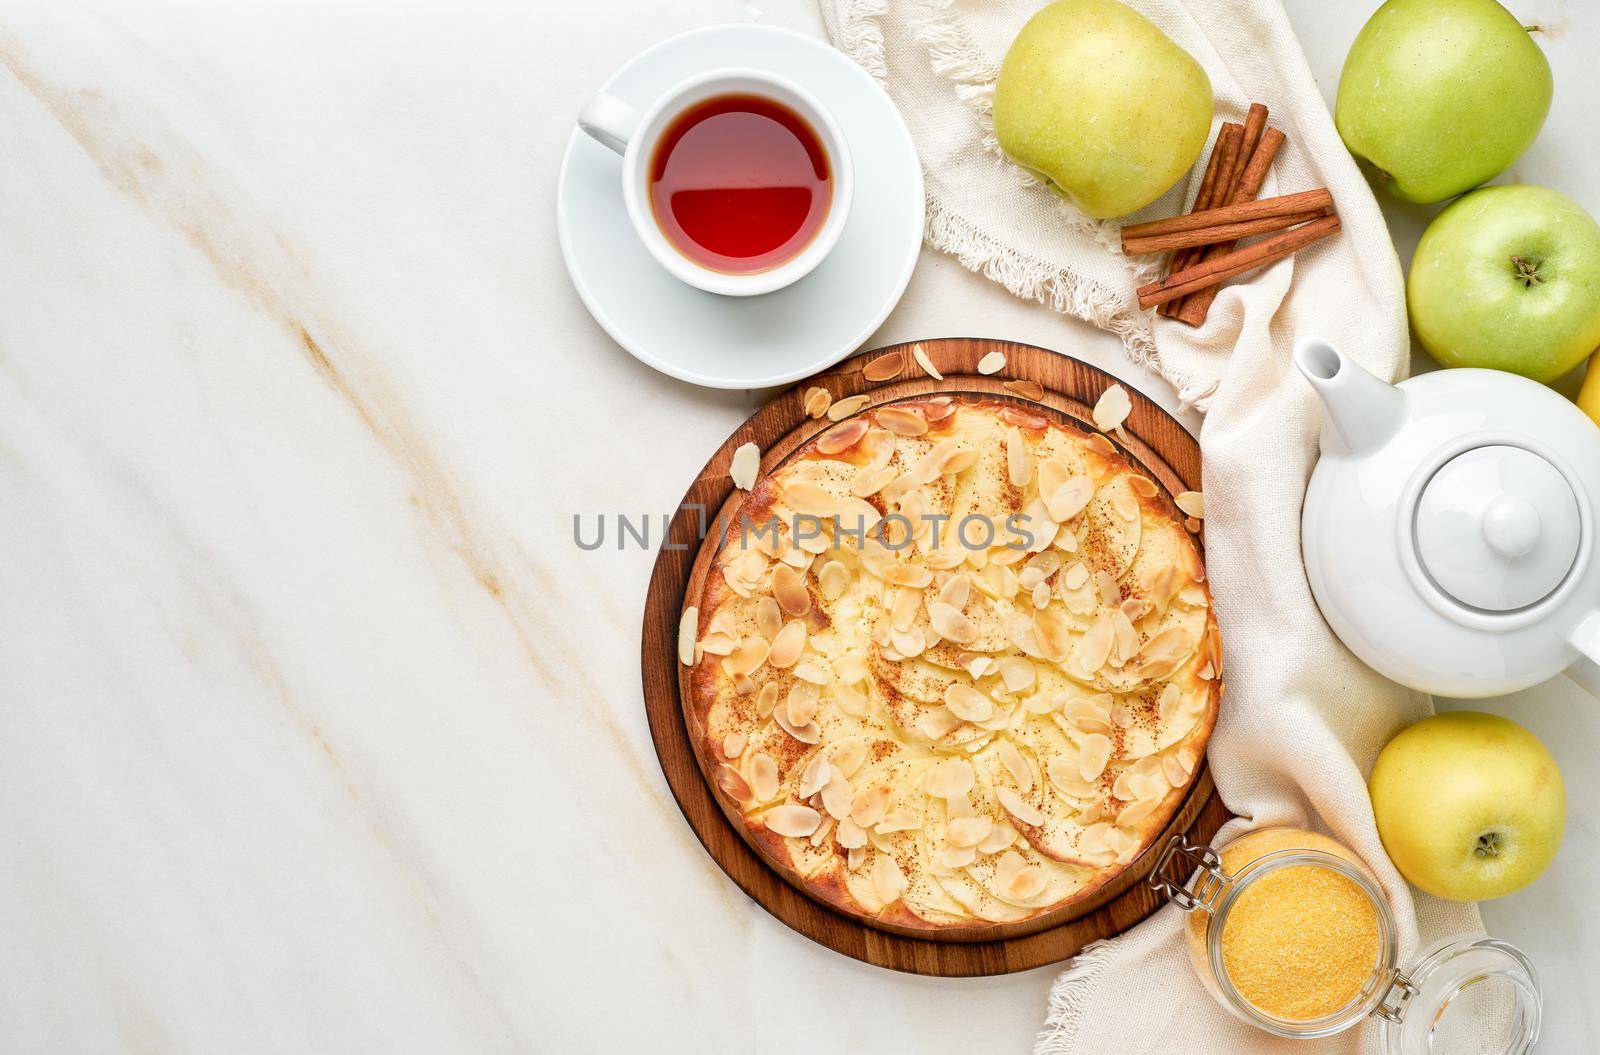 Cheesecake, apple pie, curd dessert with polenta, apples, almond flakes and cinnamon on white marble kitchen table, top view, copy space